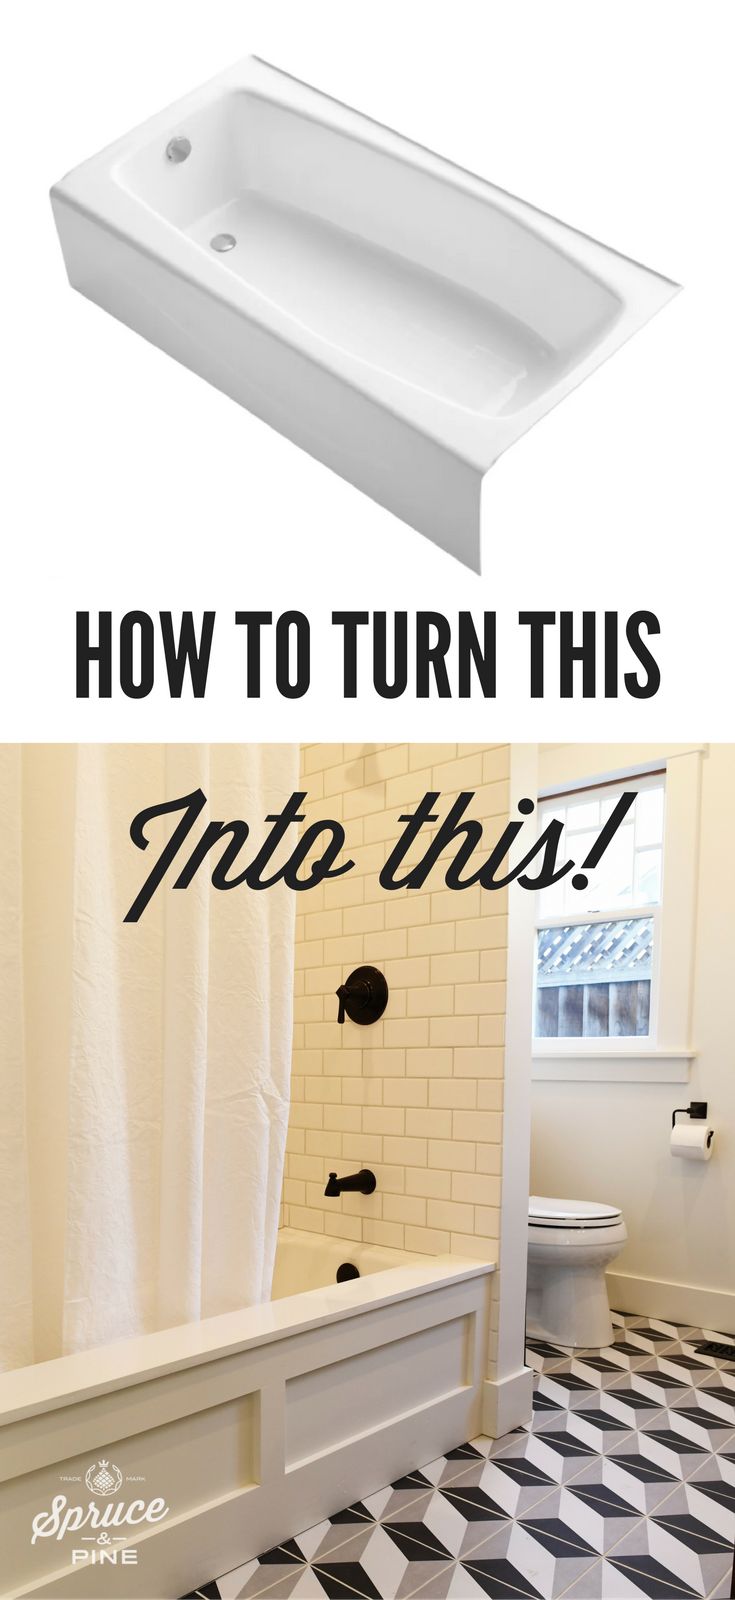 Even the most basic bath tub can be expensive. And when you are flipping homes, ...